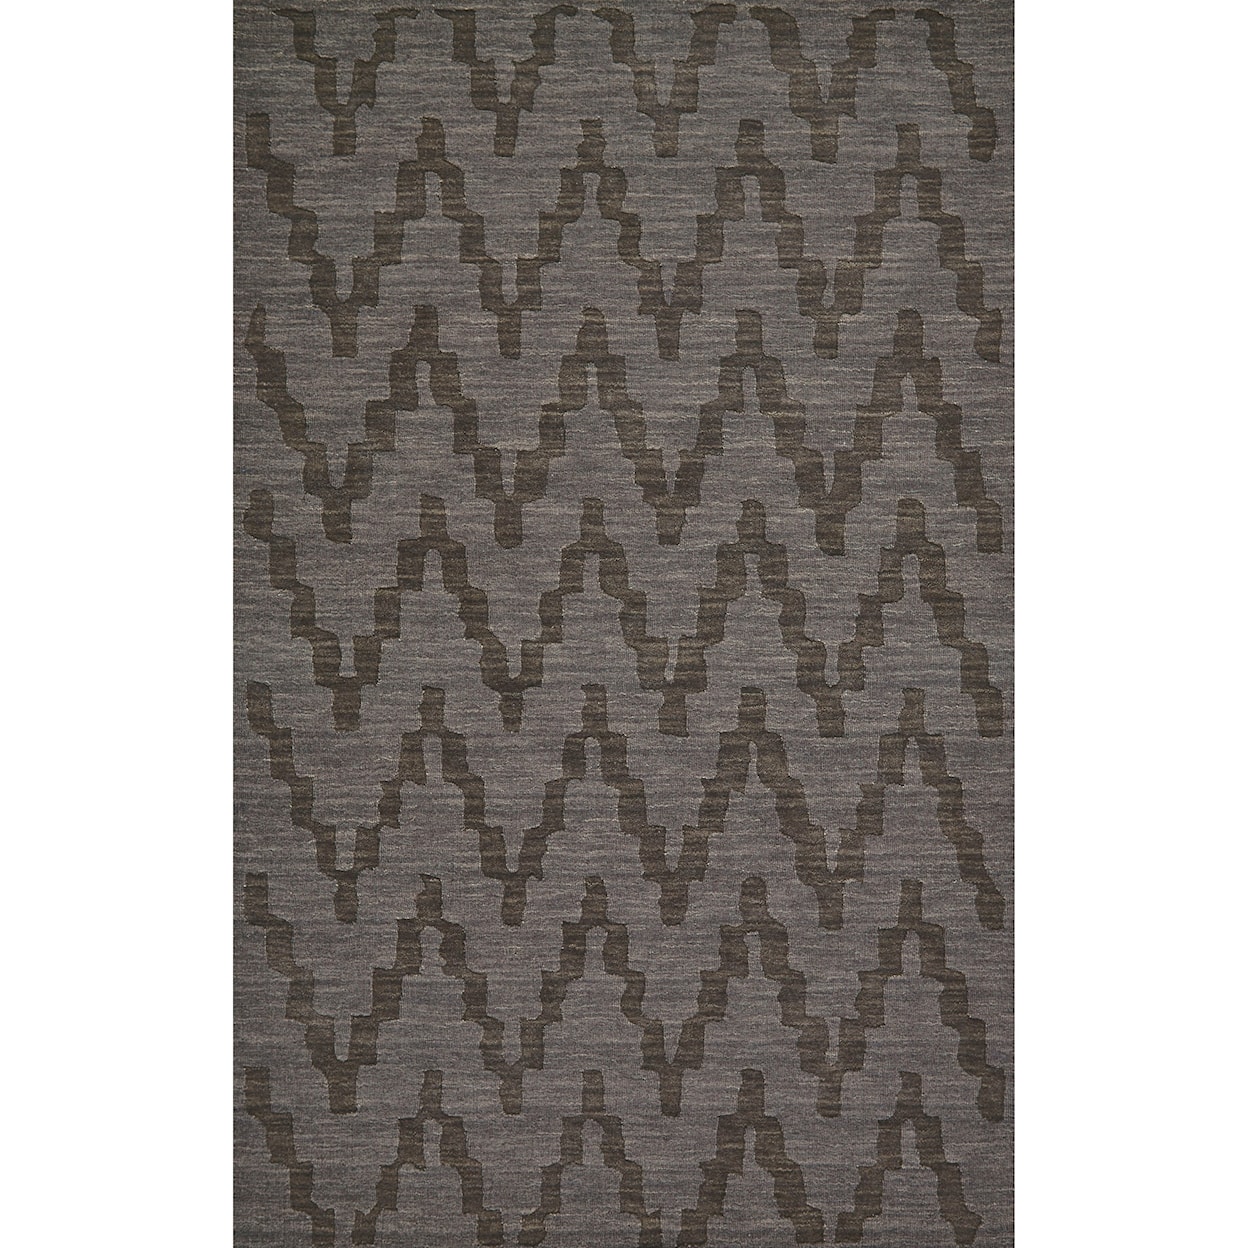 Feizy Rugs Soma Charcoal 5' x 8' Area Rug